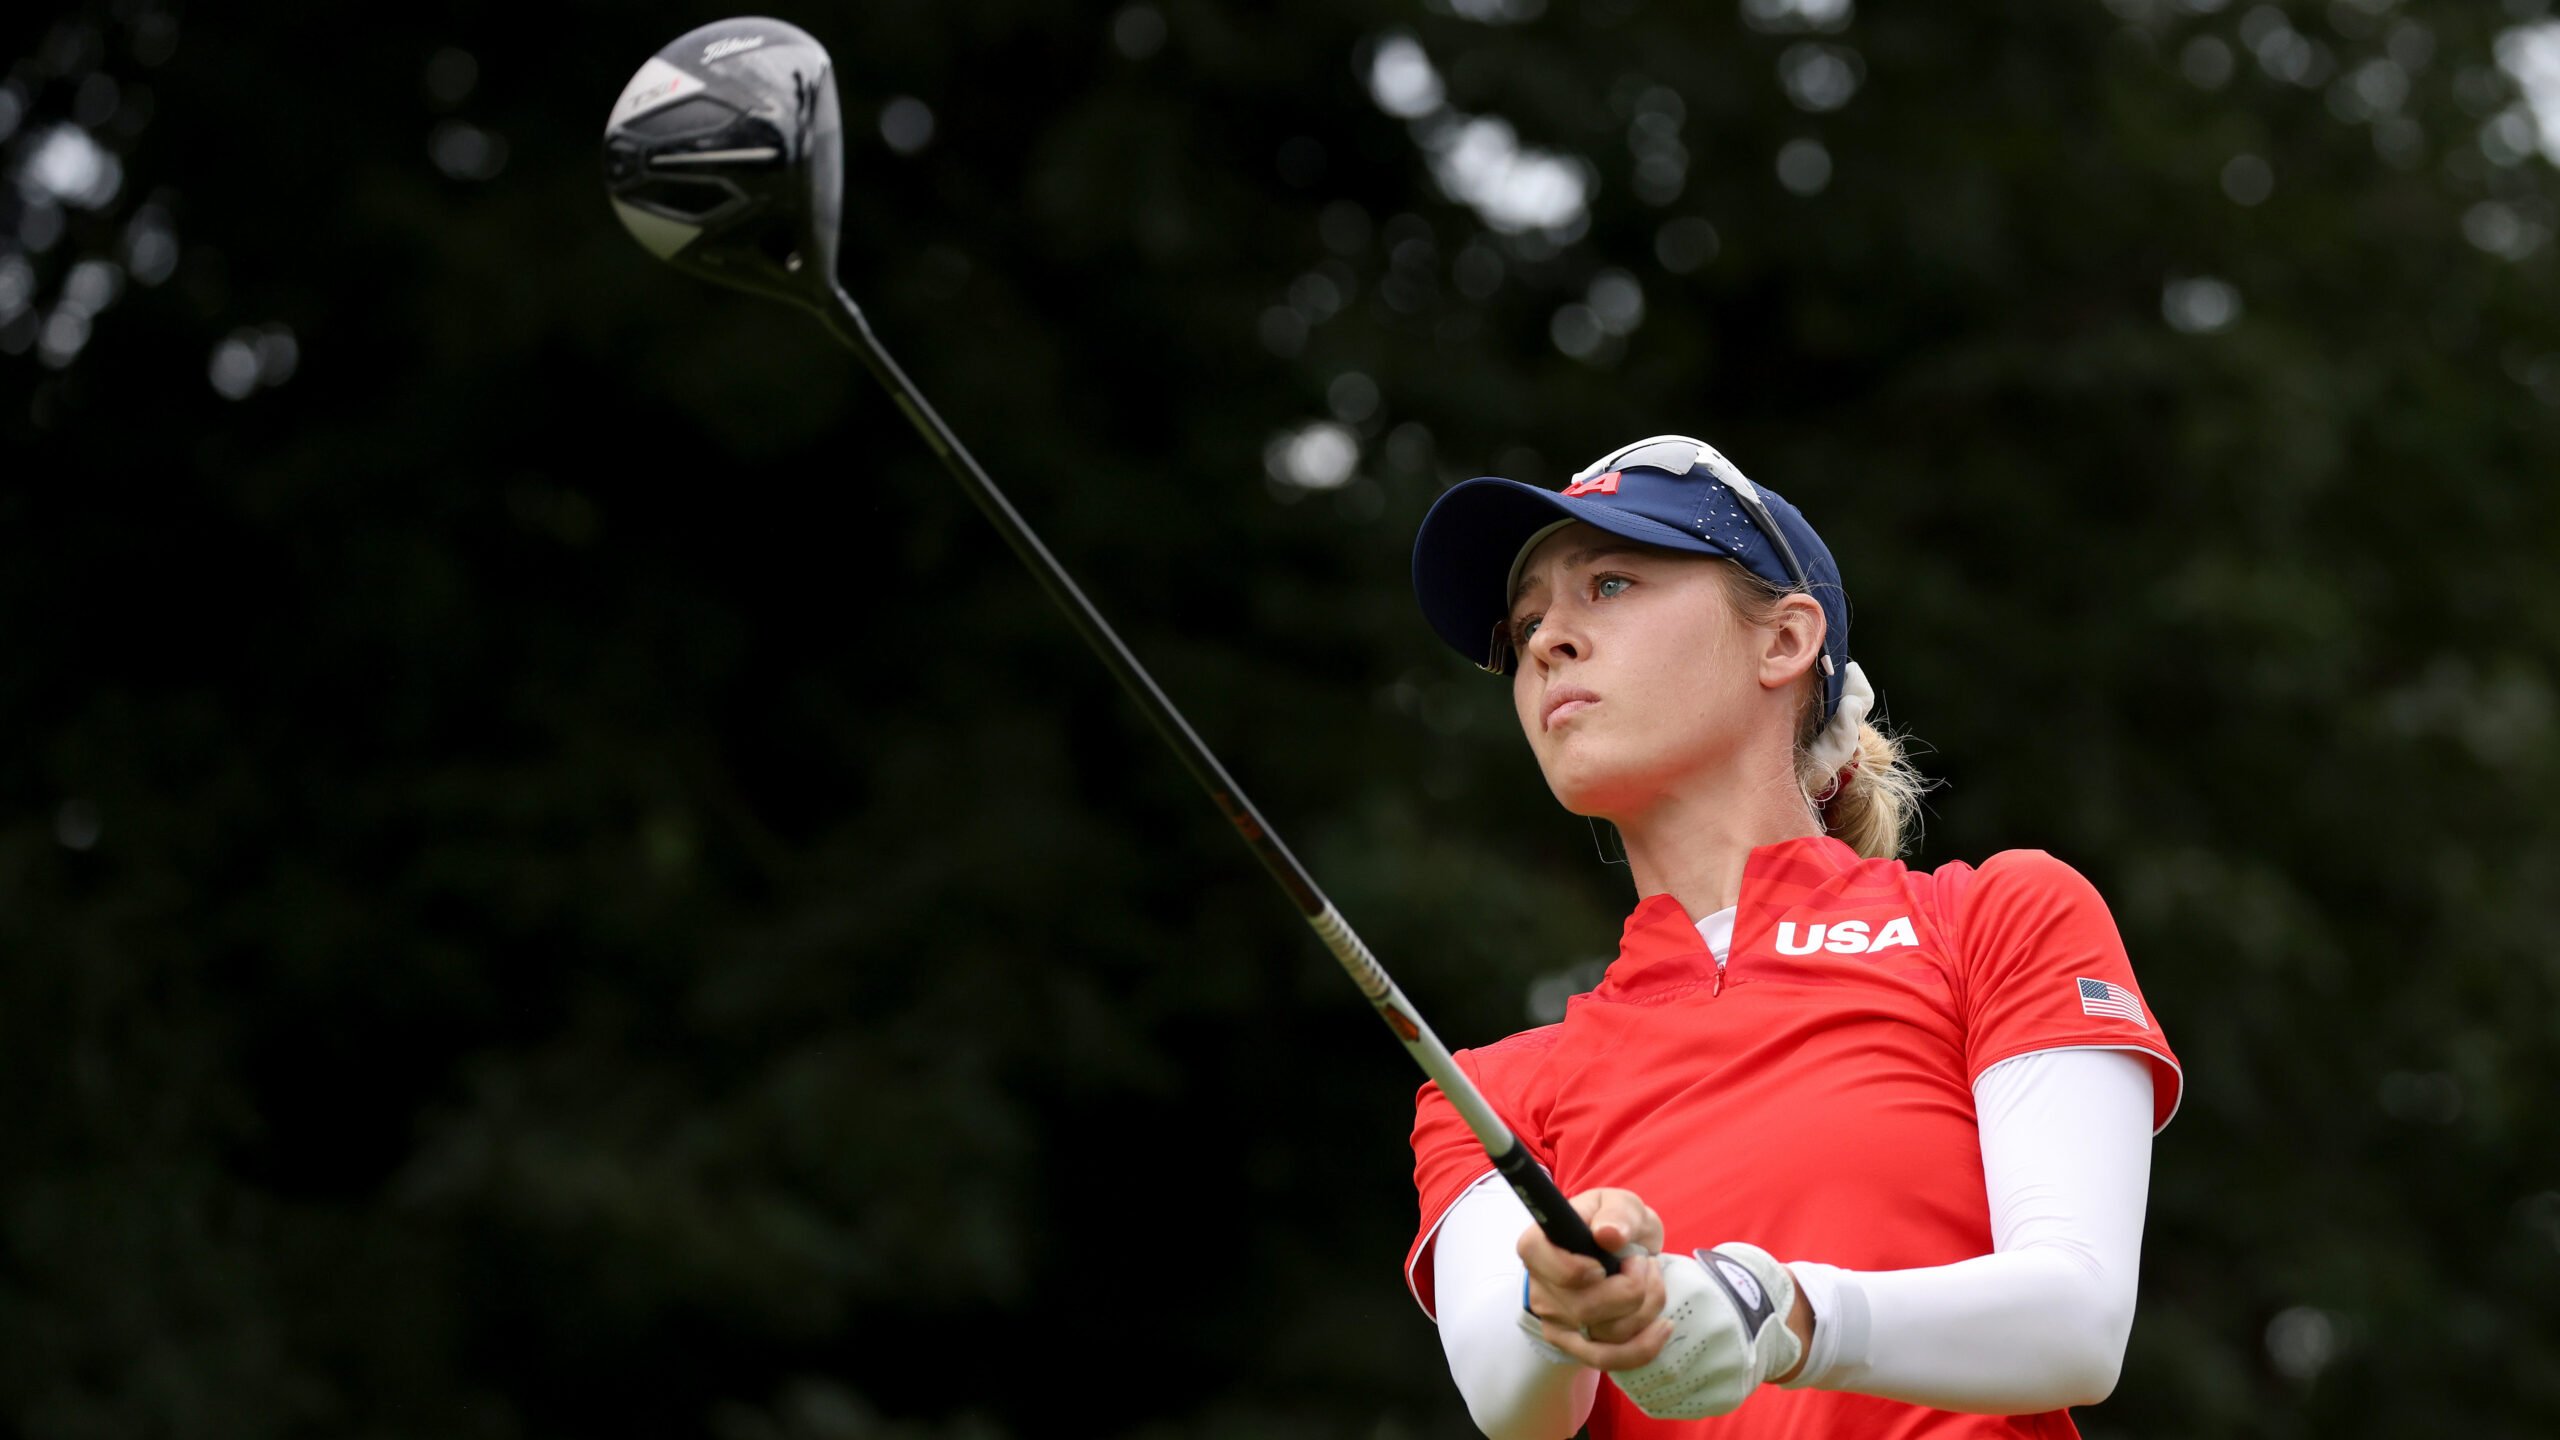 U.S. Golfer Nelly Korda Wins Olympic Gold, Completing U.S. Golden Sweep